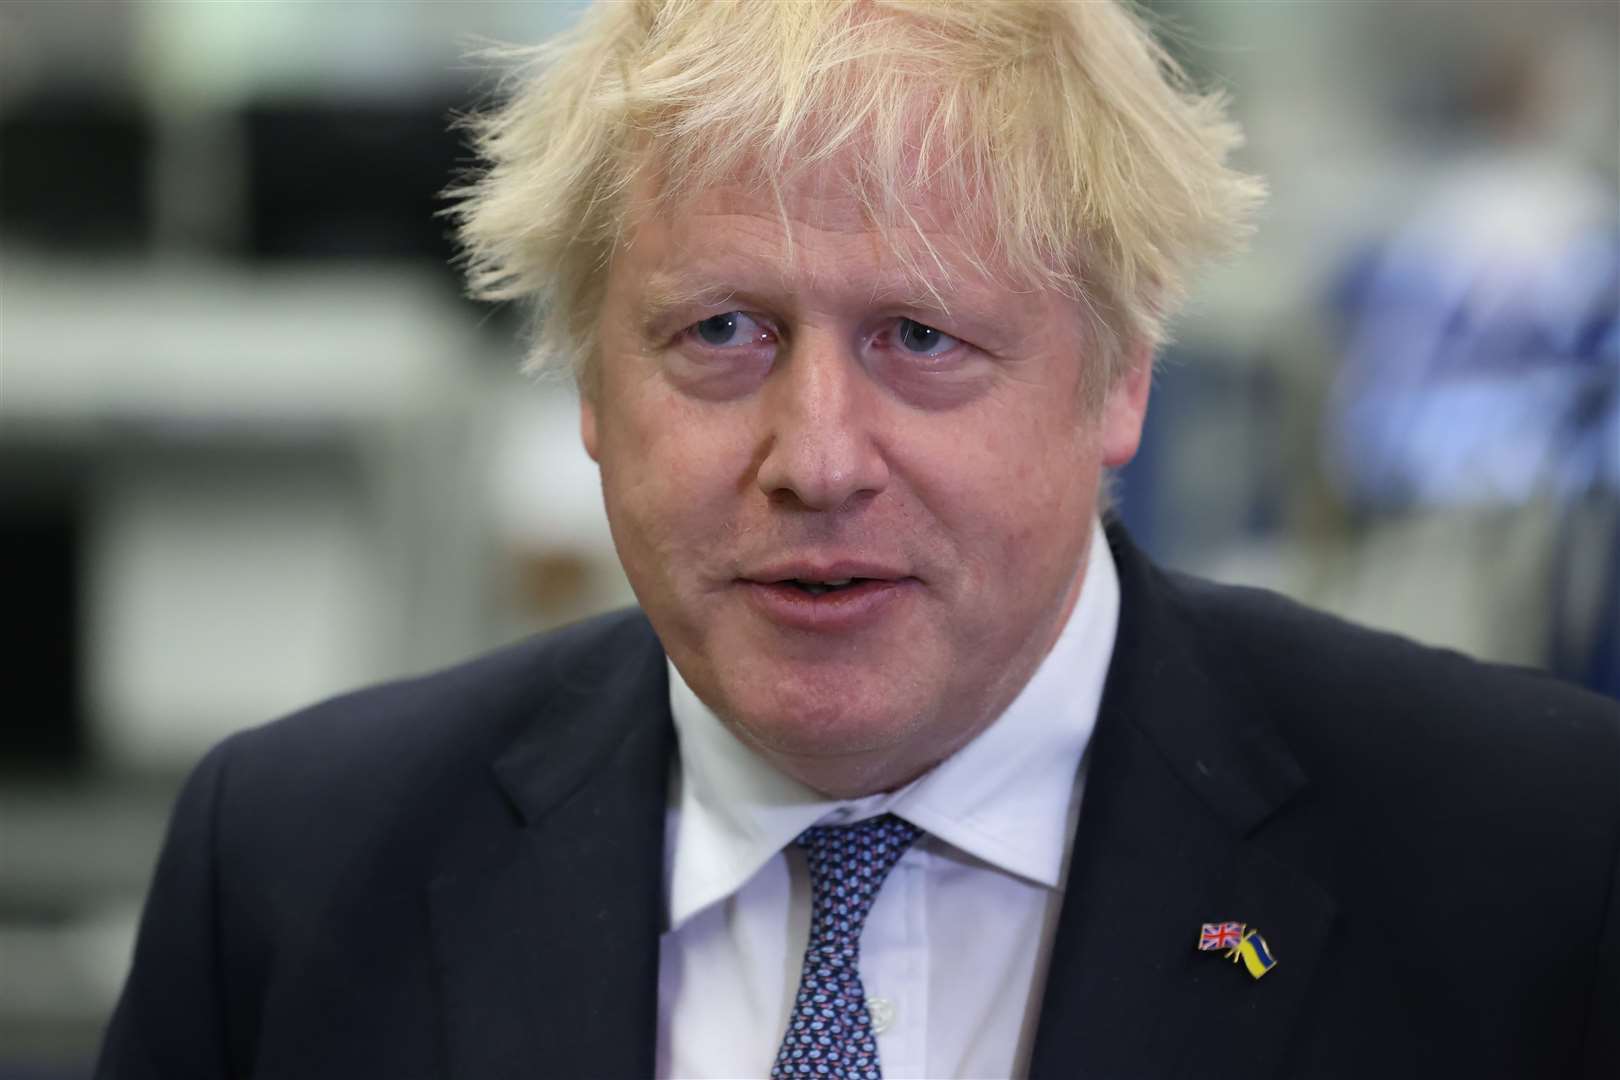 At a Cabinet meeting on Tuesday, Boris Johnson will reinforce that the critical role of any government is to protect the public (Liam McBurney/PA)